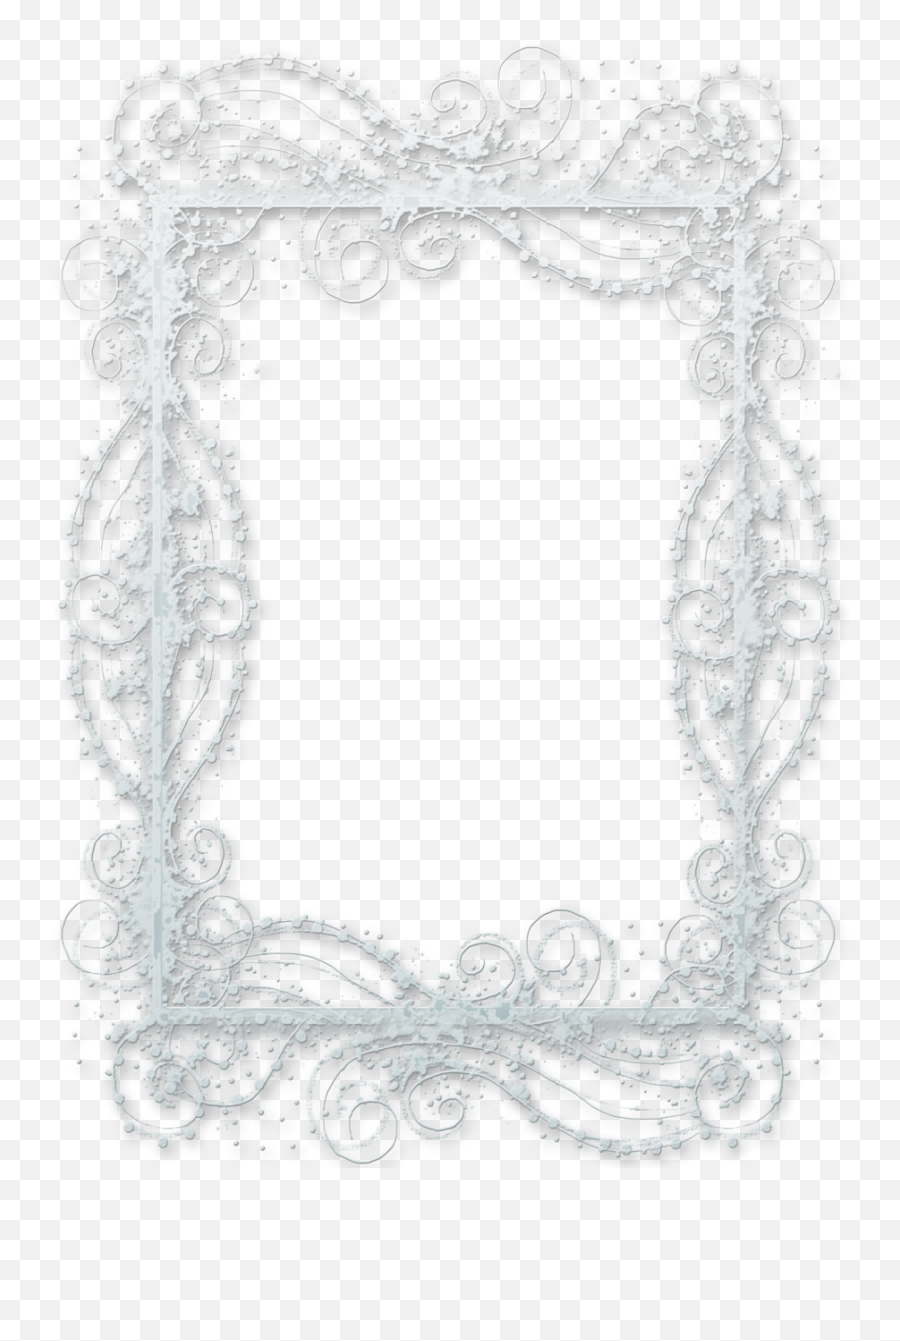 Snow Frame Transparent Png Clipart - Frame Png With Snow,Snowflake Frame Png